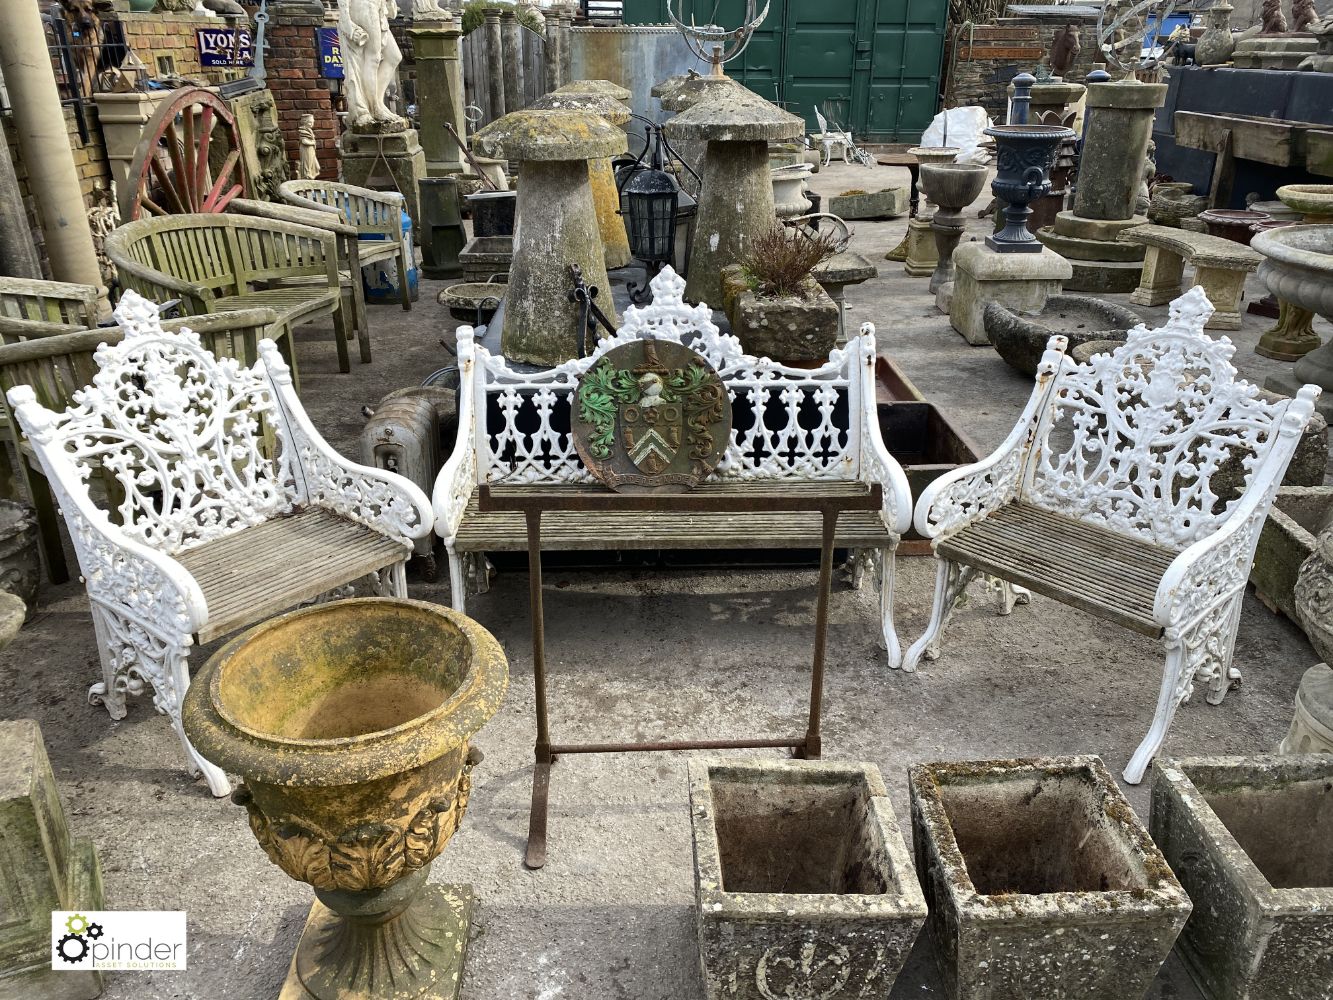 Bi Annual Unreserved Auction of Architectural and Household Antiques, Building and Garden Features